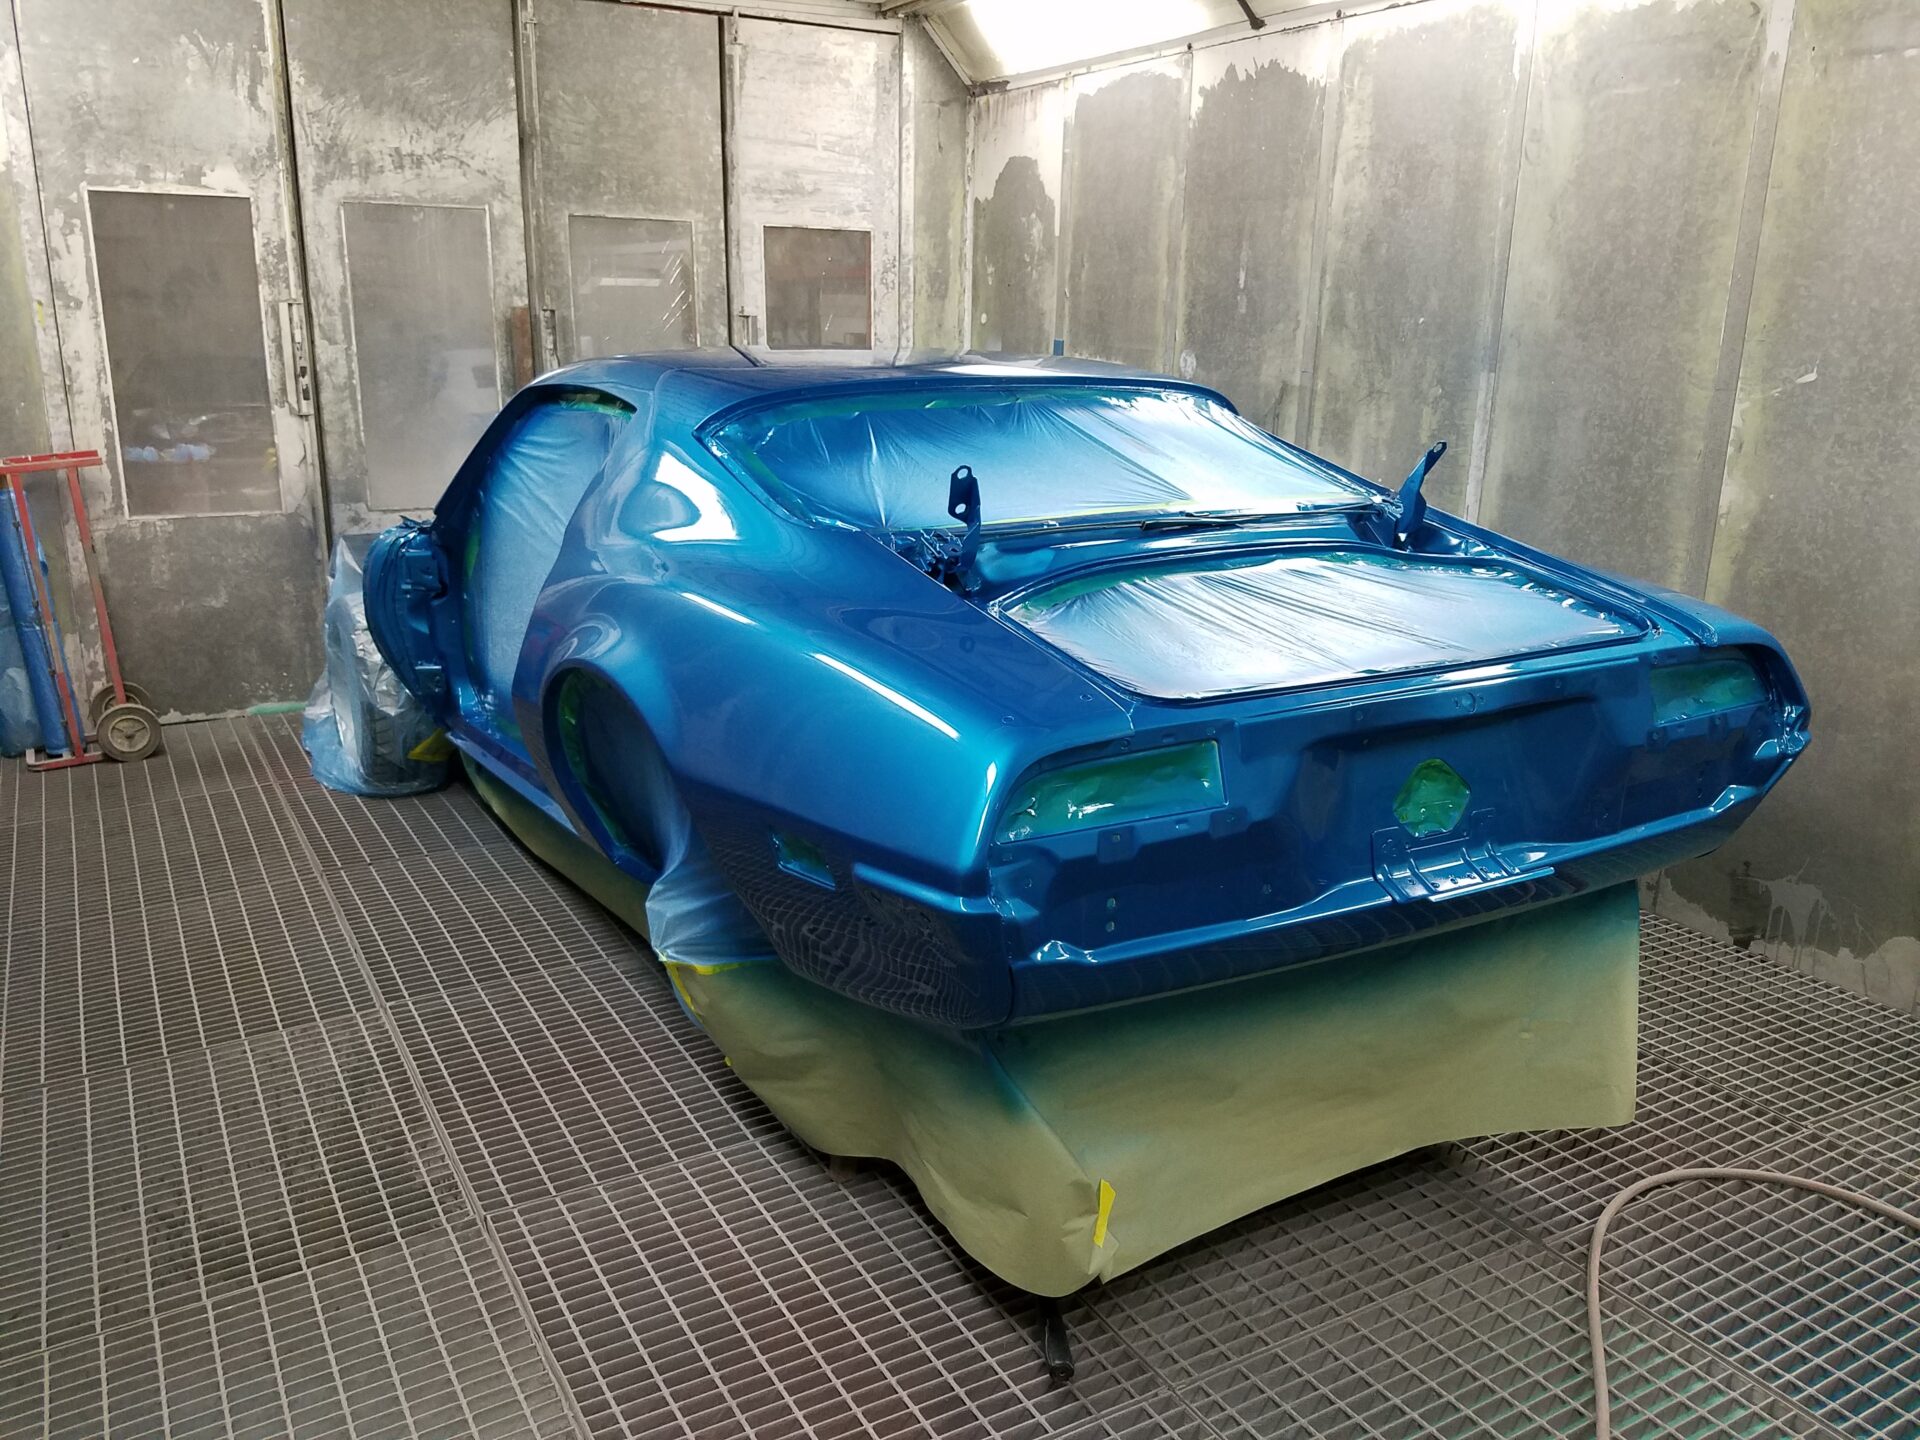 Glossy blue added to the 1971 Pontiac Trans Am